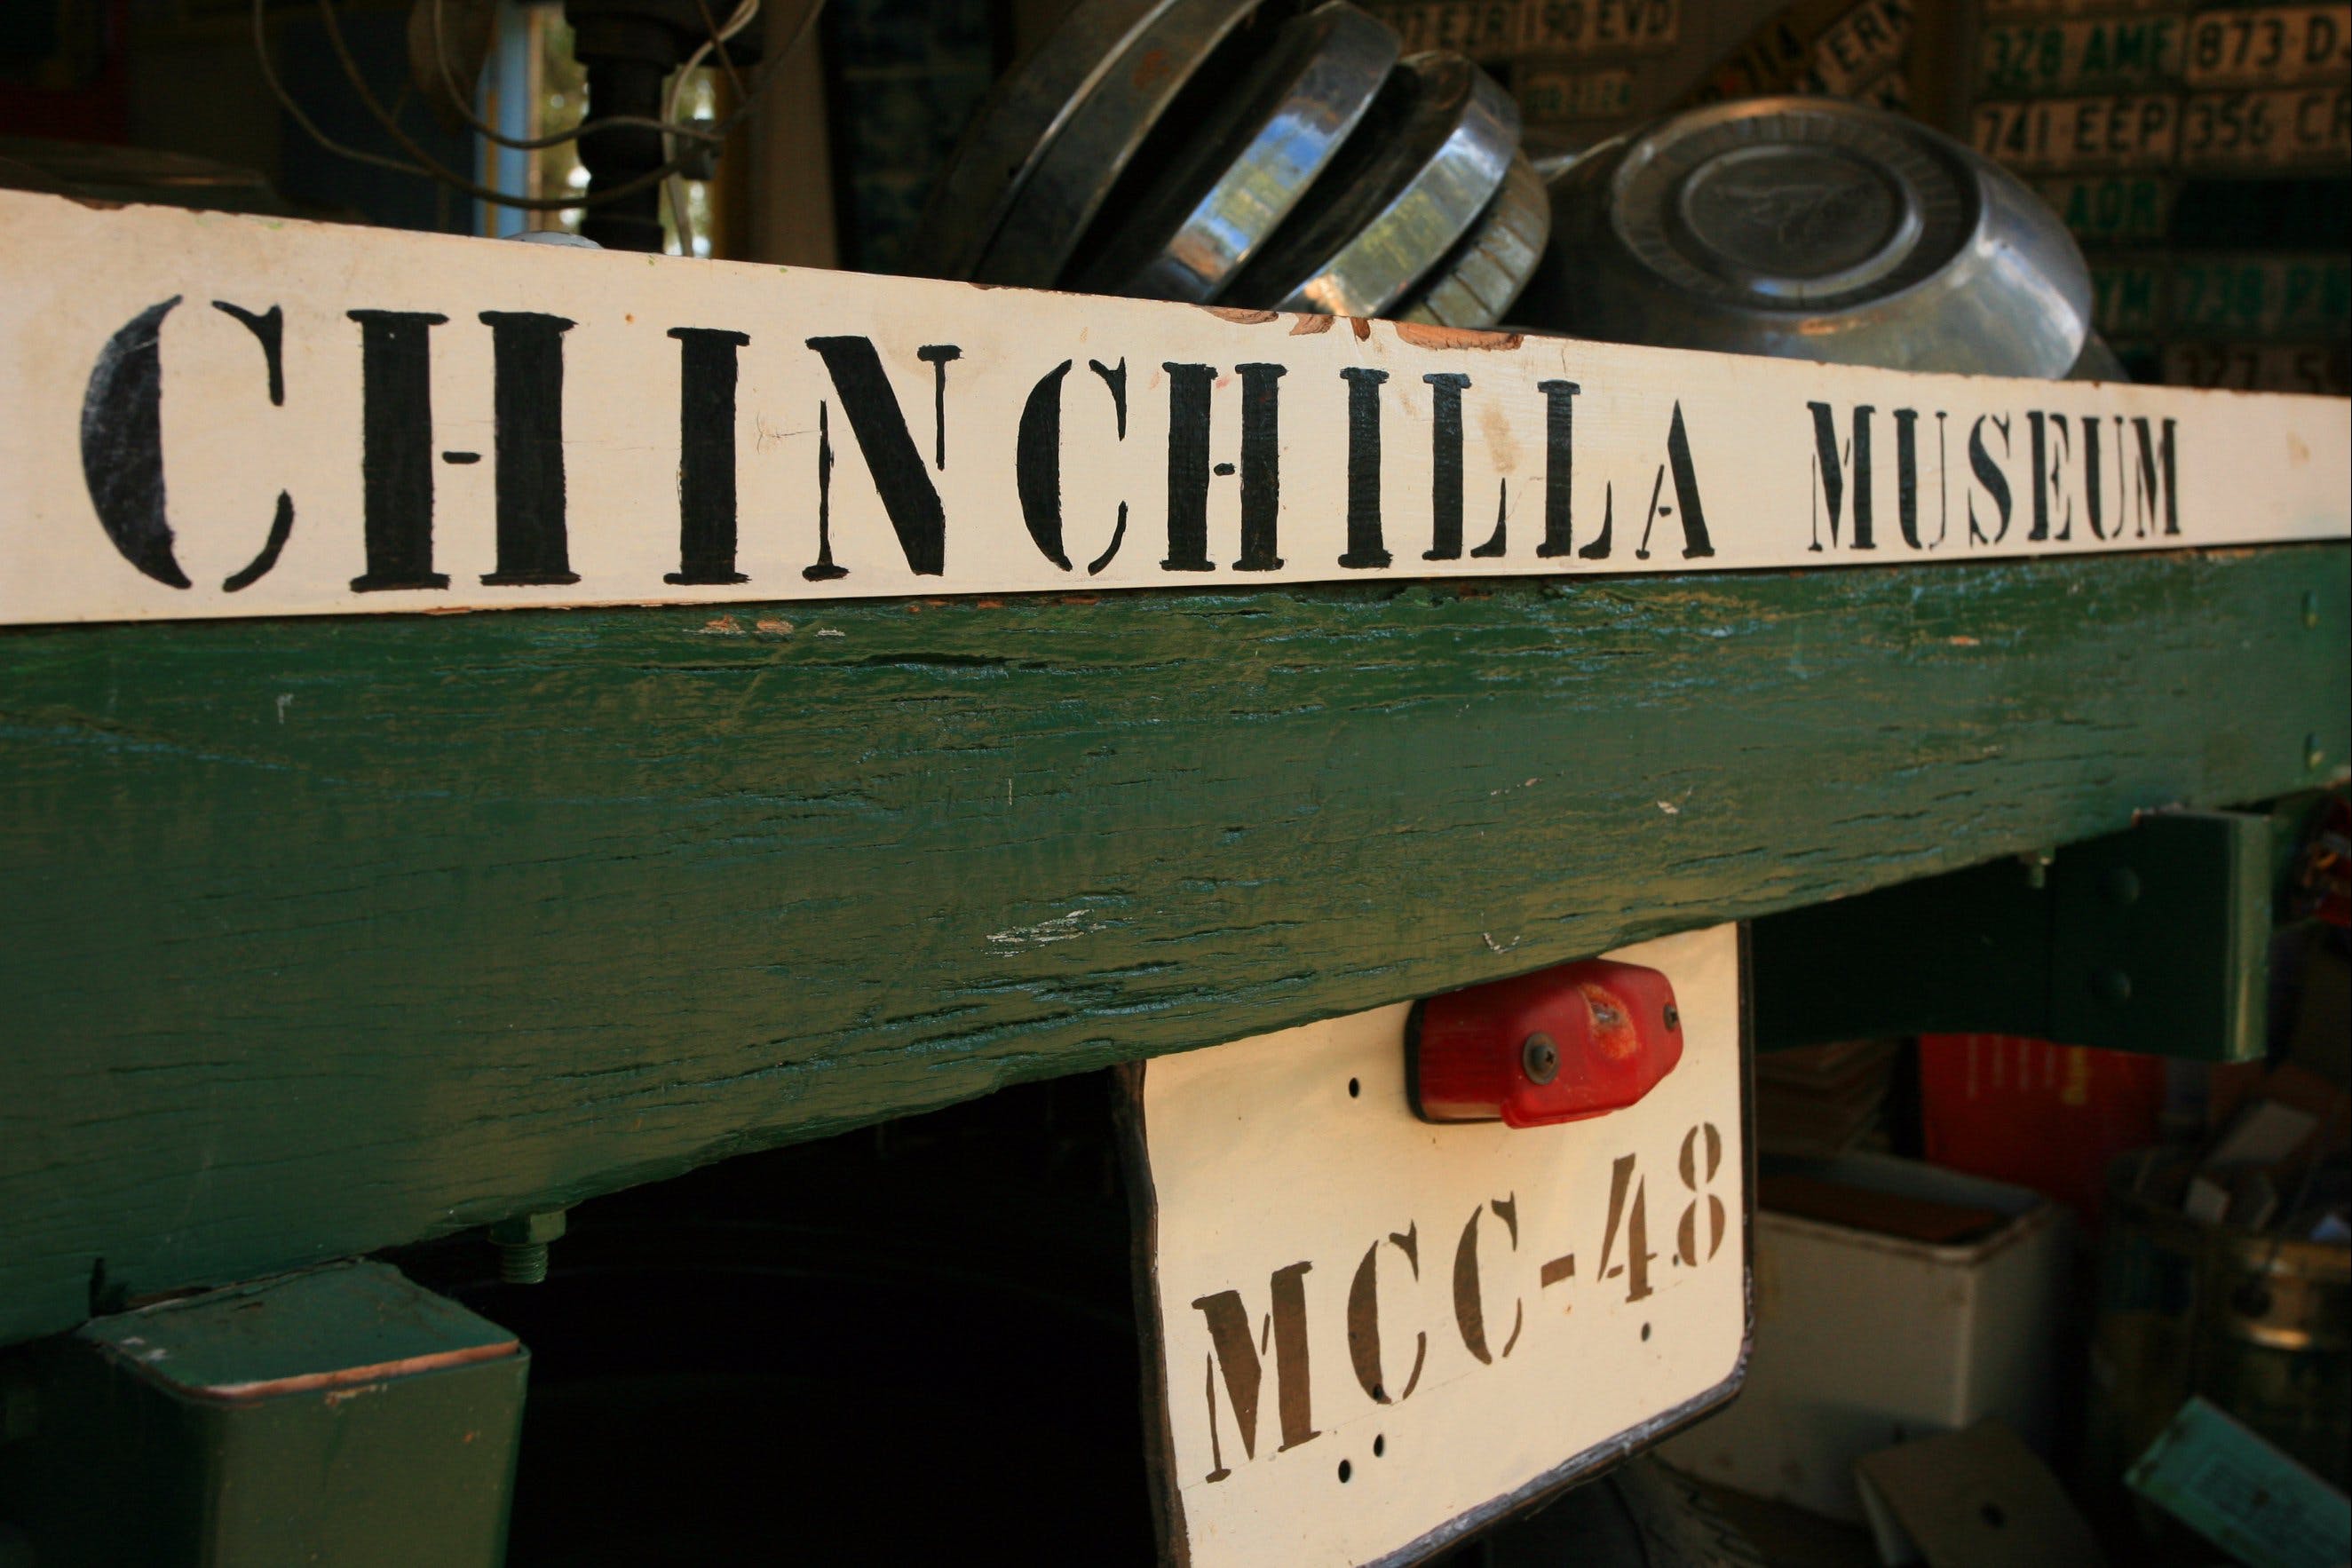 Chinchilla Historical Museum - Find Attractions